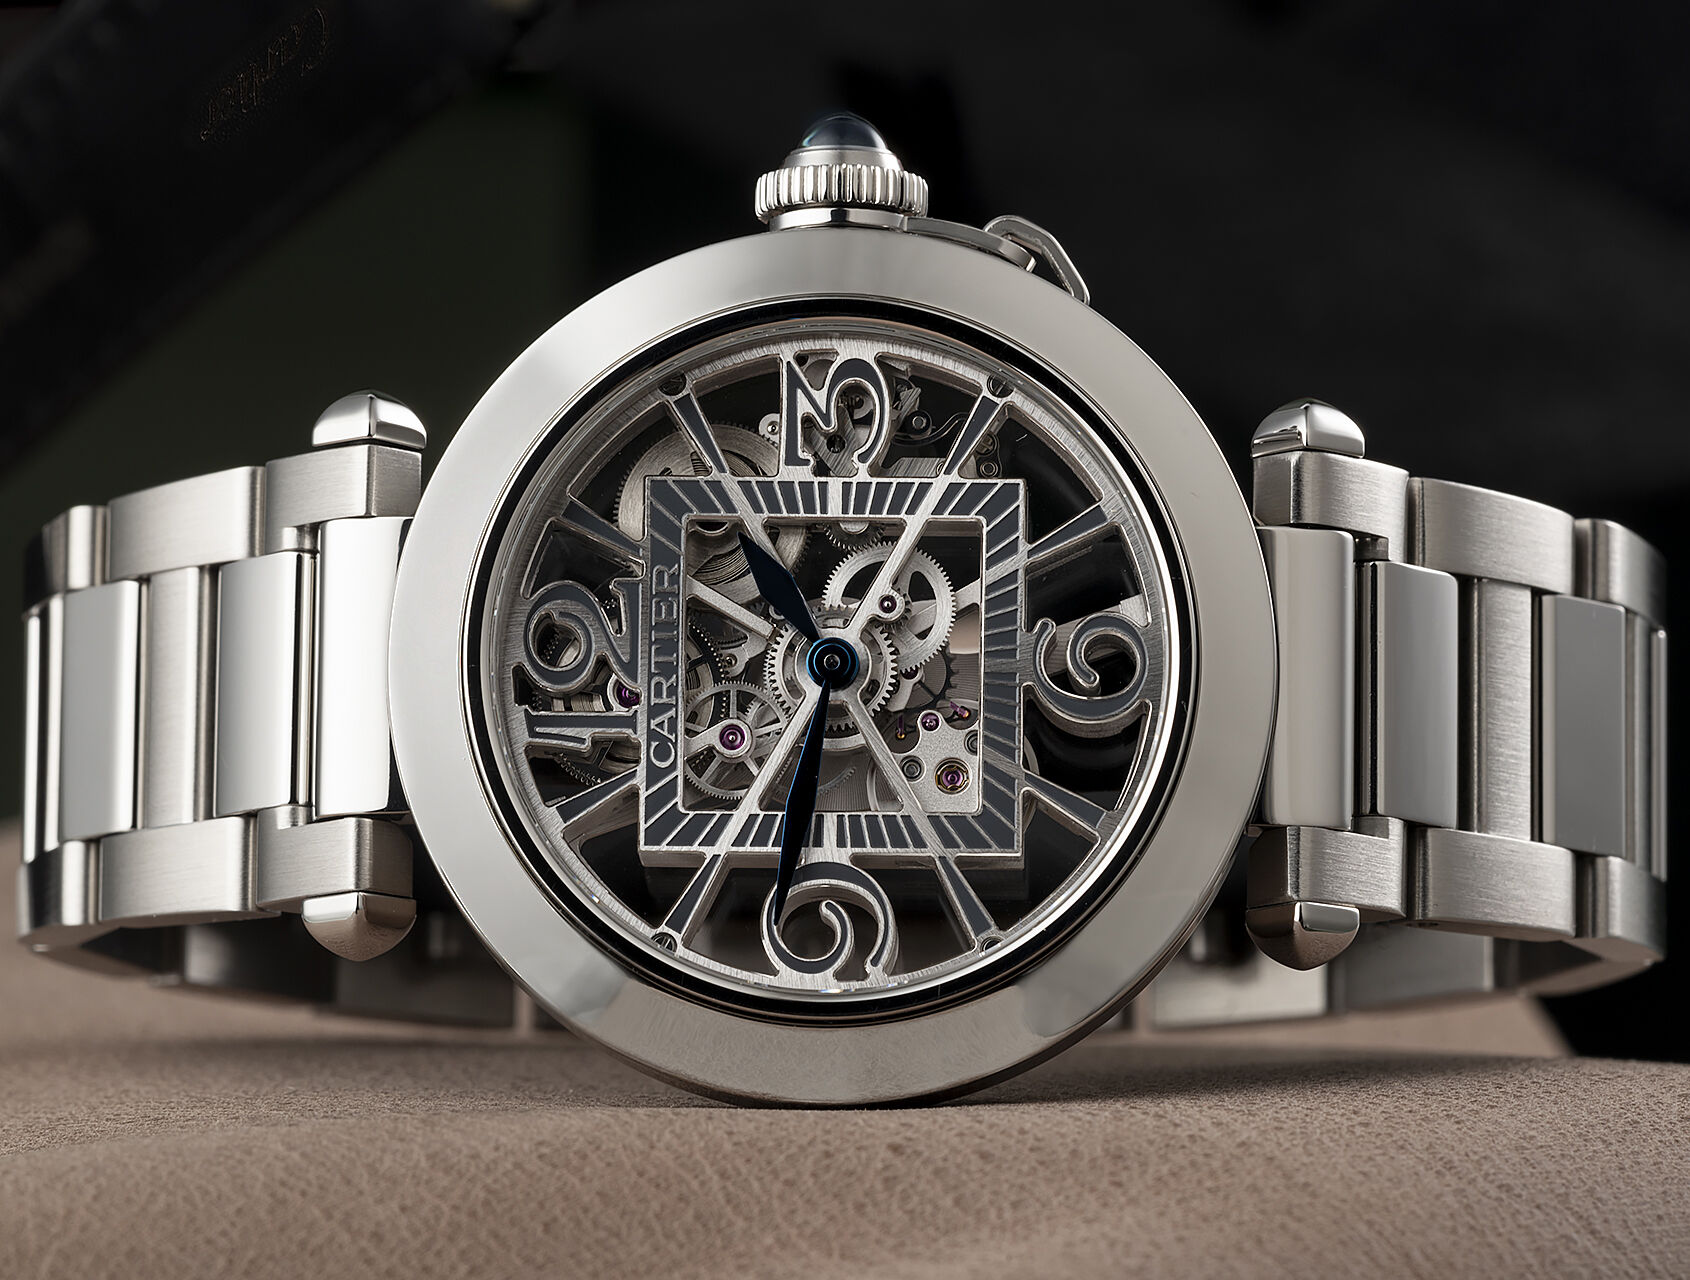 ref WHPA0007 | WHPA0007 - Skeleton Dial | Cartier Pasha 